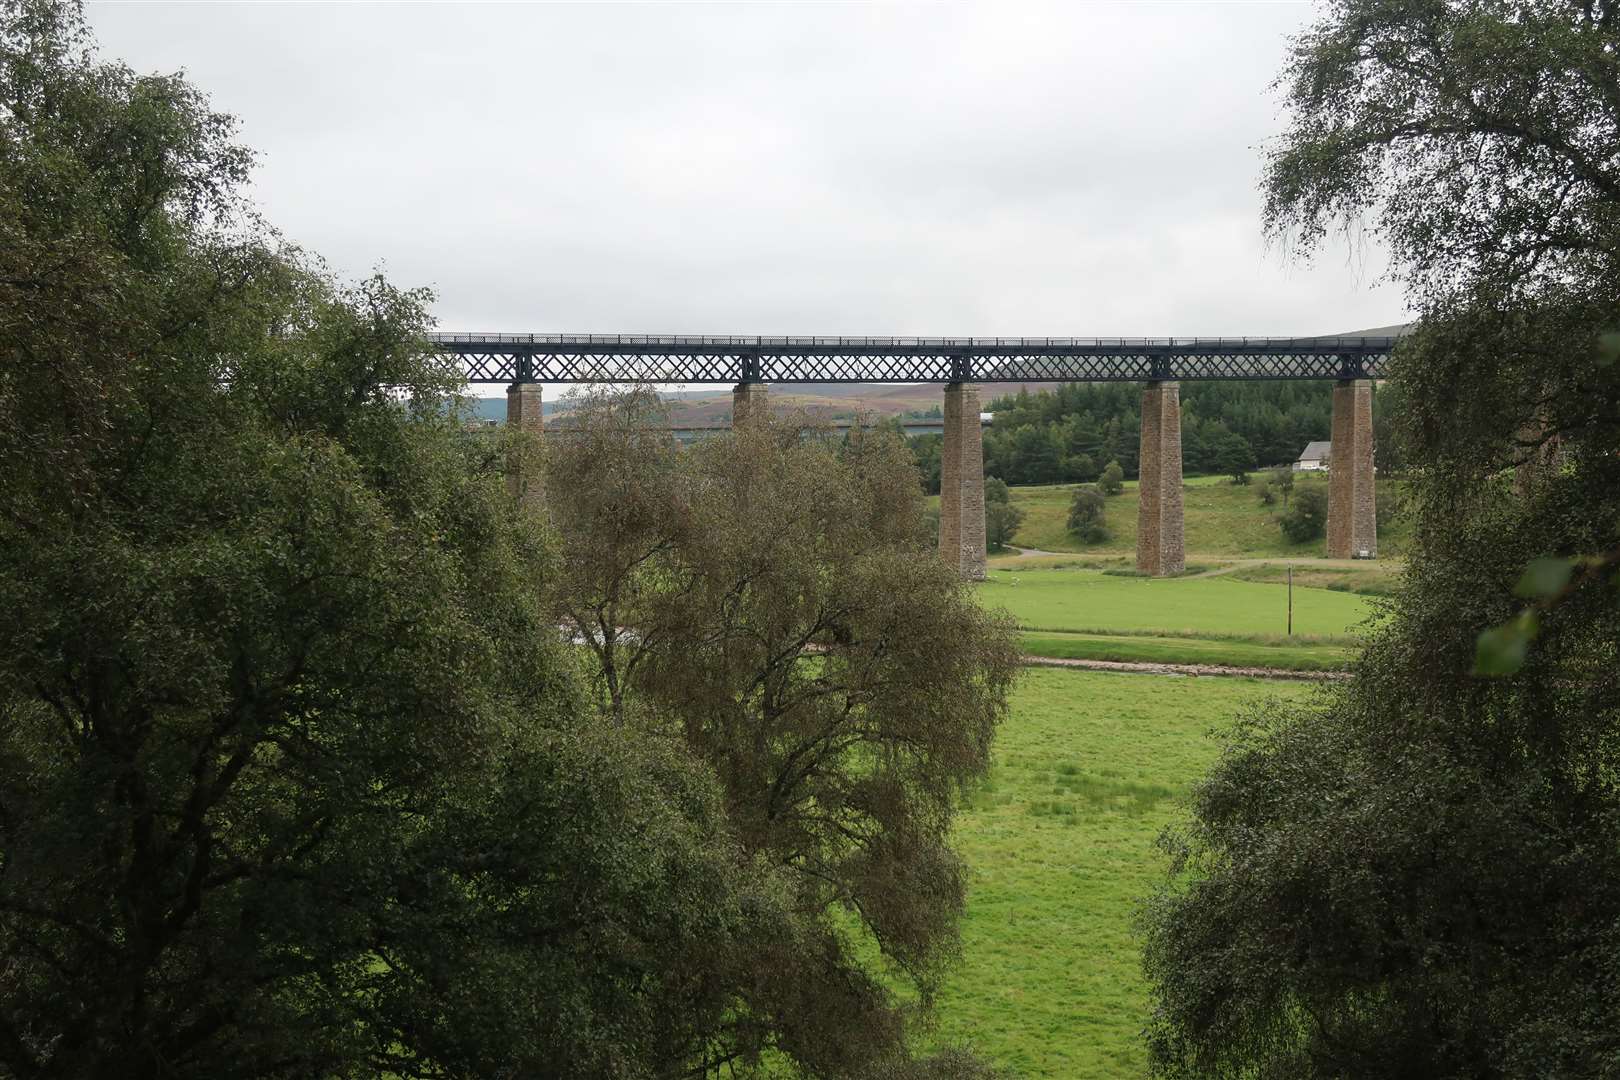 The railway bridge over the Findhorn with the A9 road bridge beyond.